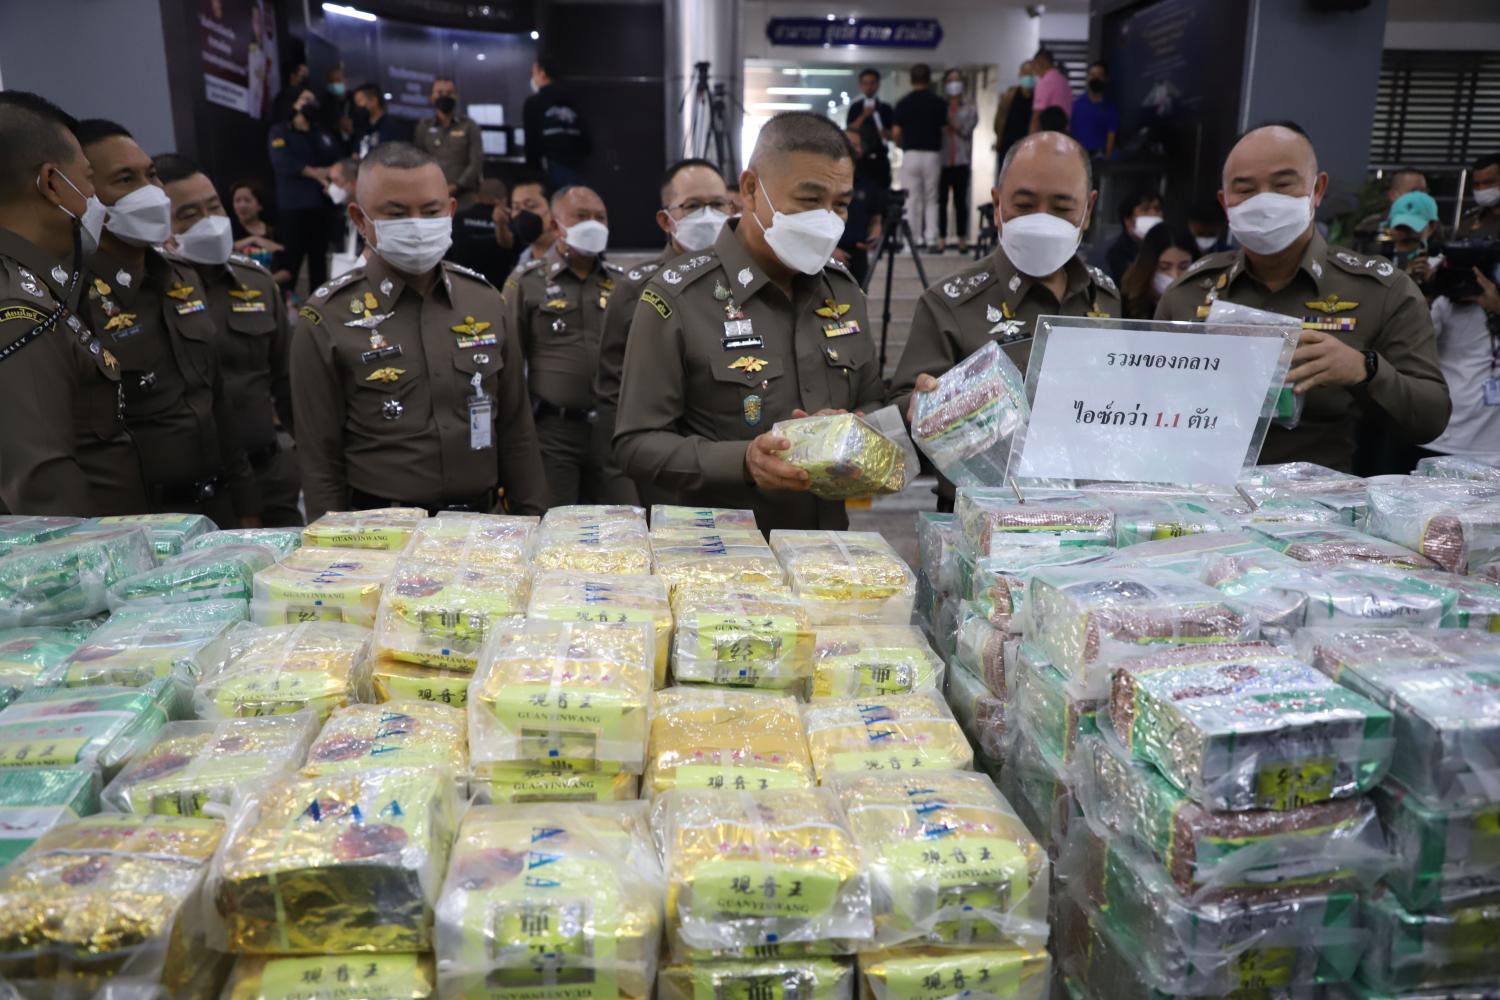 Police in Thailand Seize 1.14 Tonnes of Crystal Meth